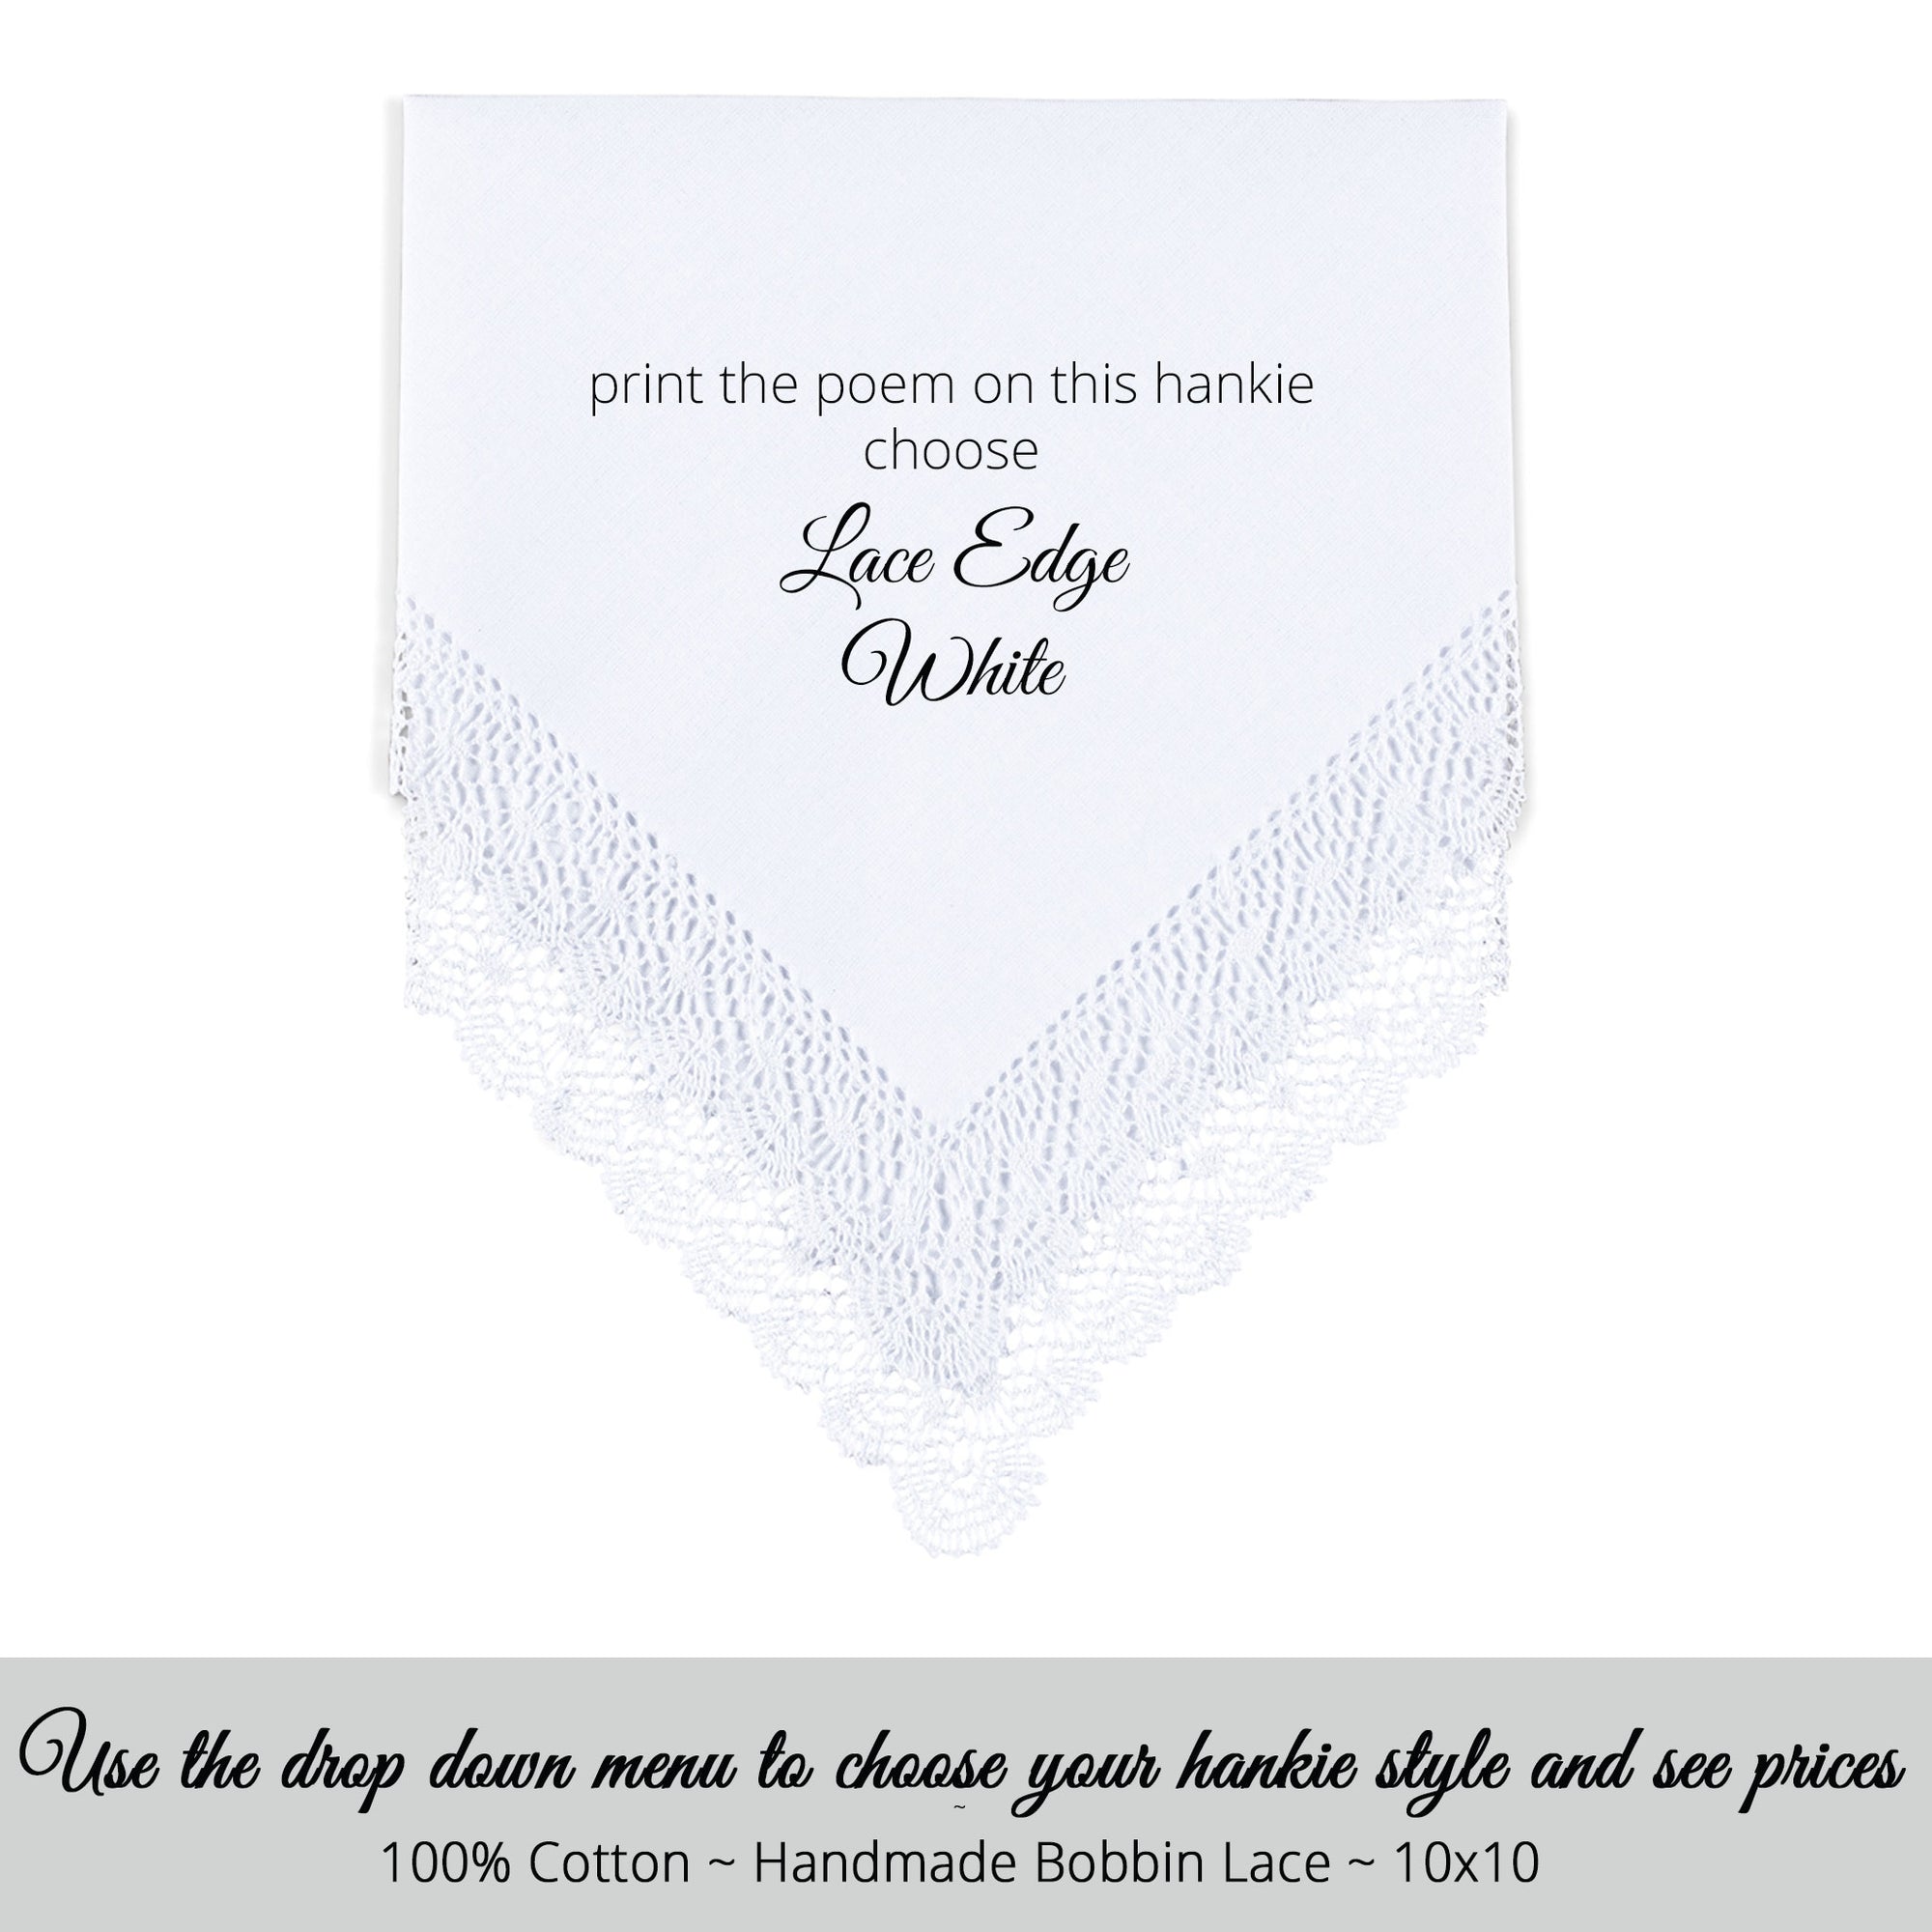 Wedding Handkerchief white with bobbin lace poem printed hankie for the sister in law of the bride